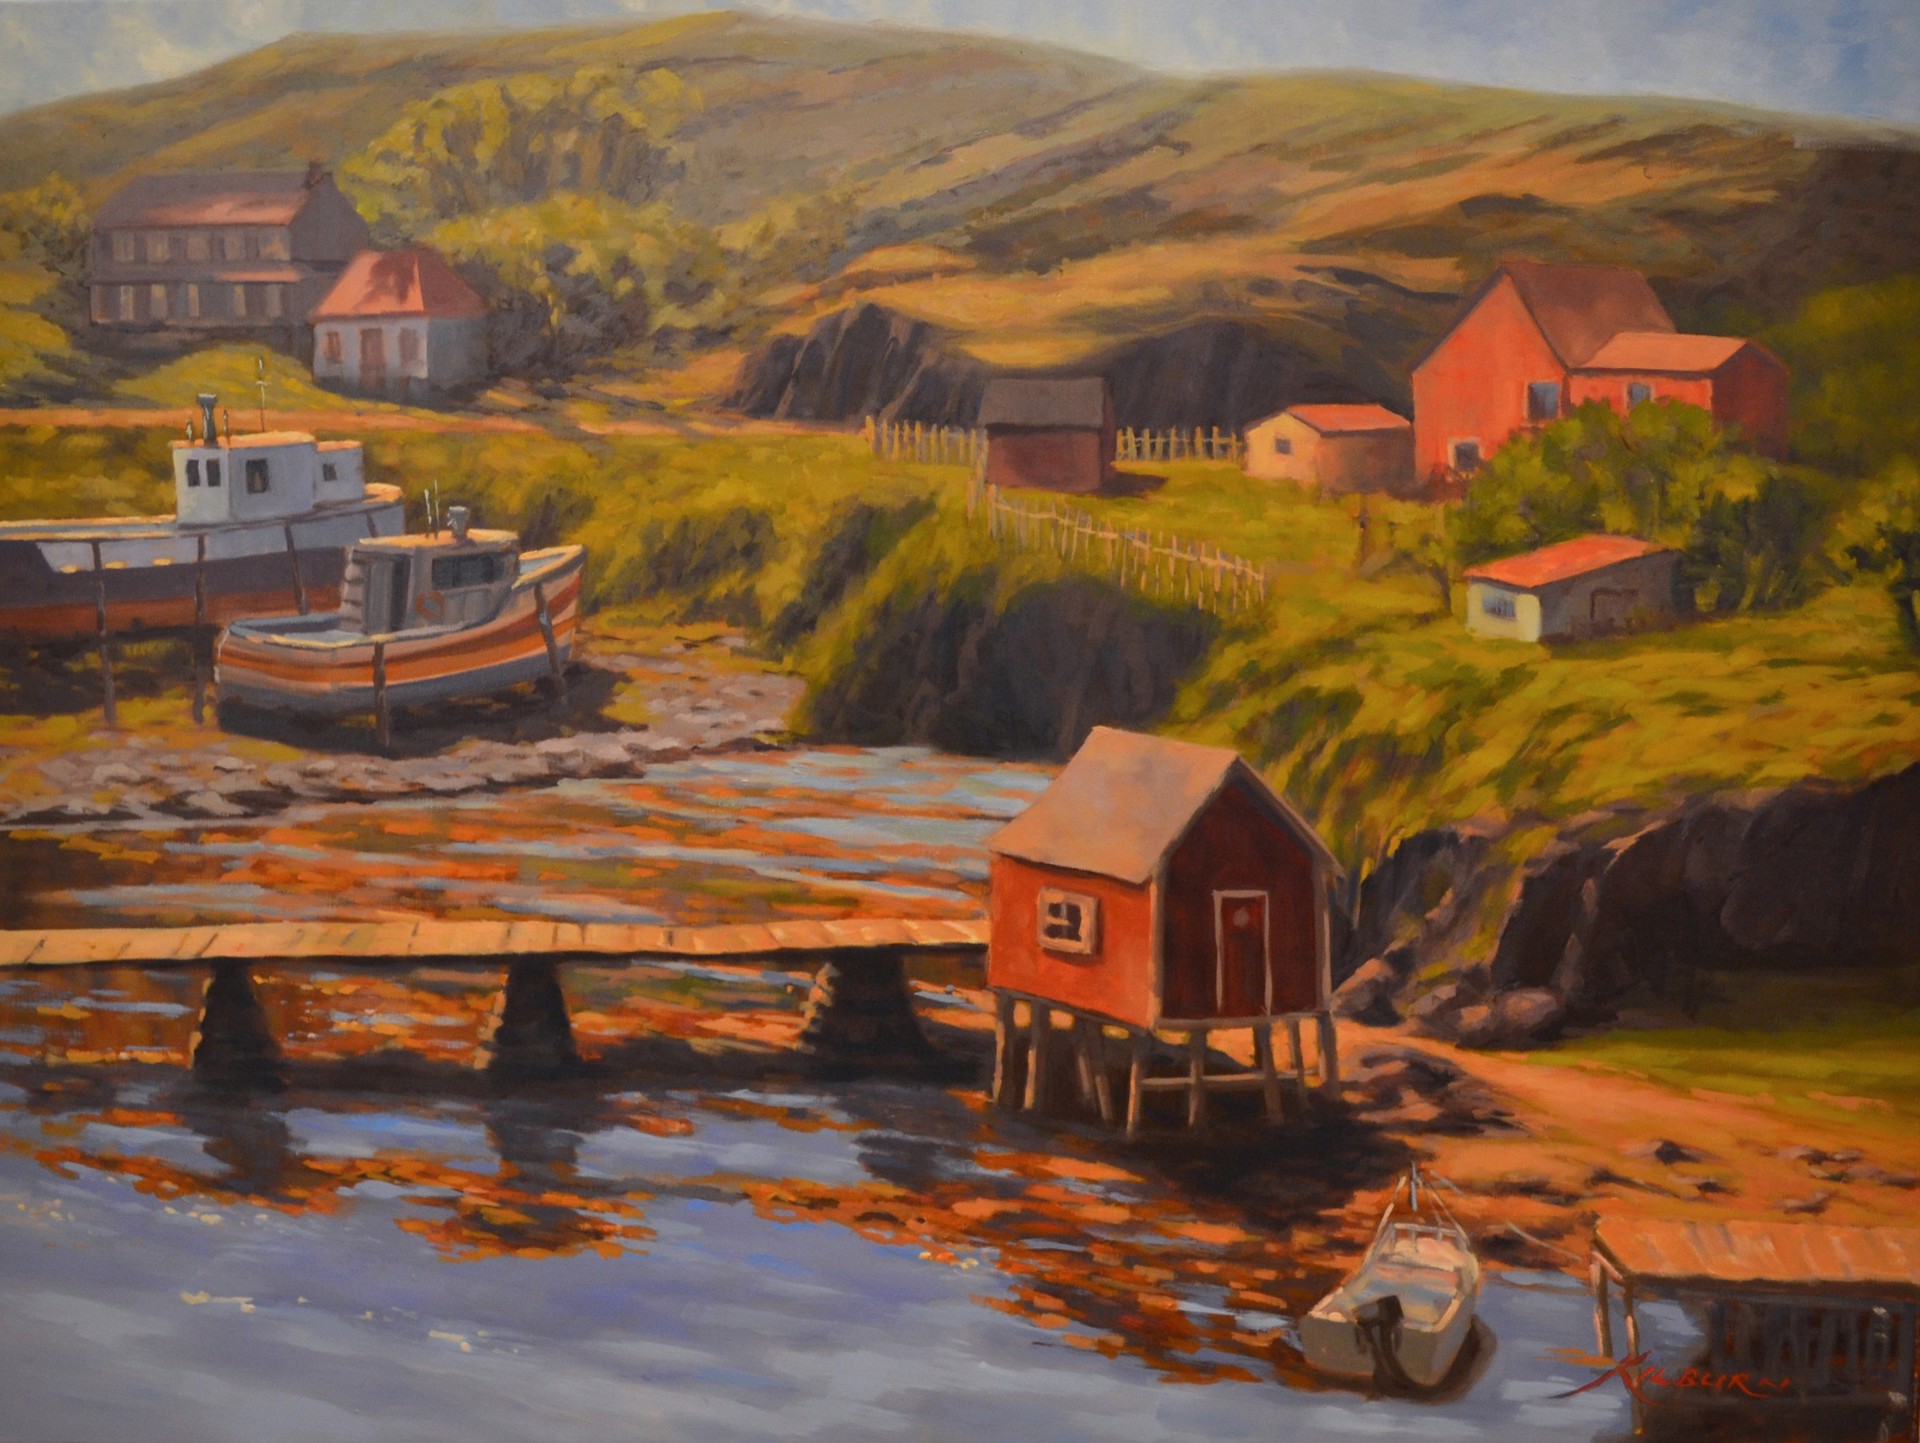 Sunday Afternoon in Twillingate by Michael Kilburn